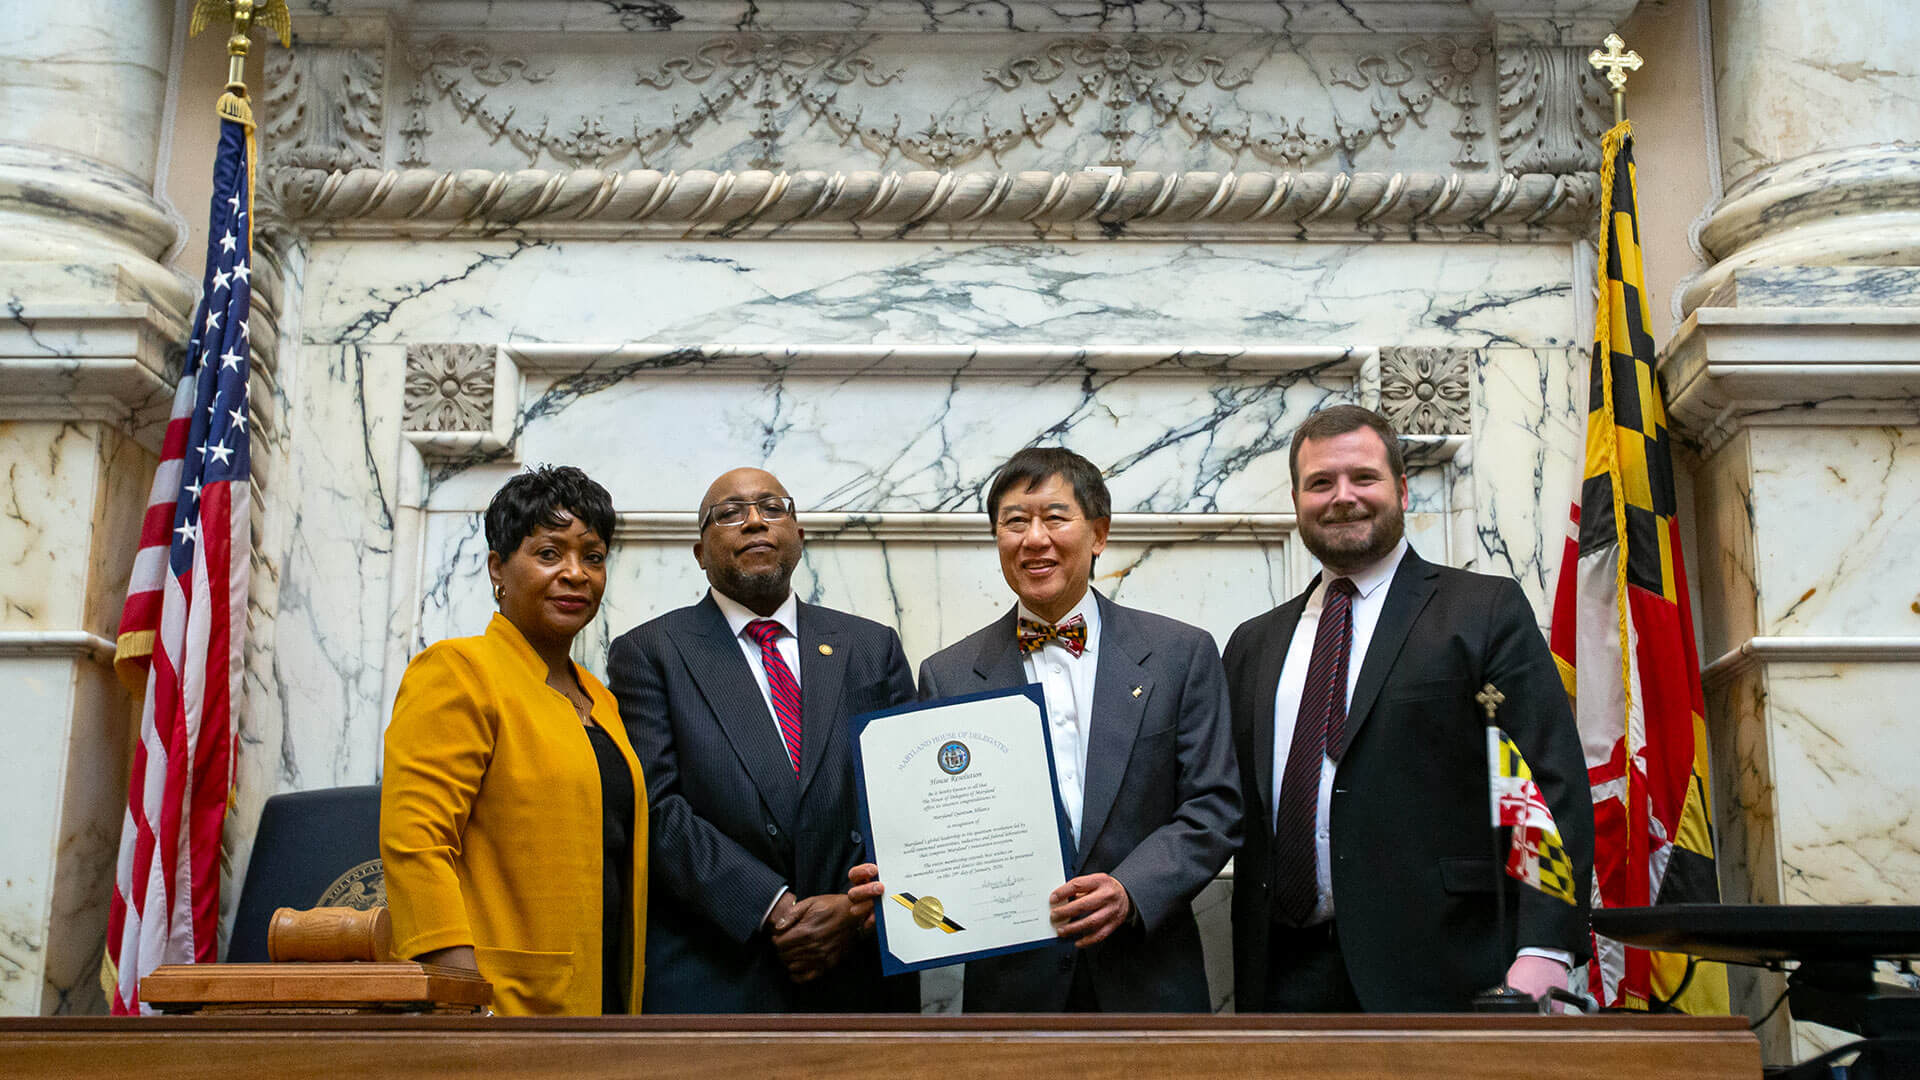 At the Maryland statehouse, UMD President Wallace D. Loh holds a proclamation recognizing the alliance. From left, House Speaker Adrienne A. Jones, Morgan State University President Willie May Ph.D. '77, and Baltimore County Del. Pat Young look on.